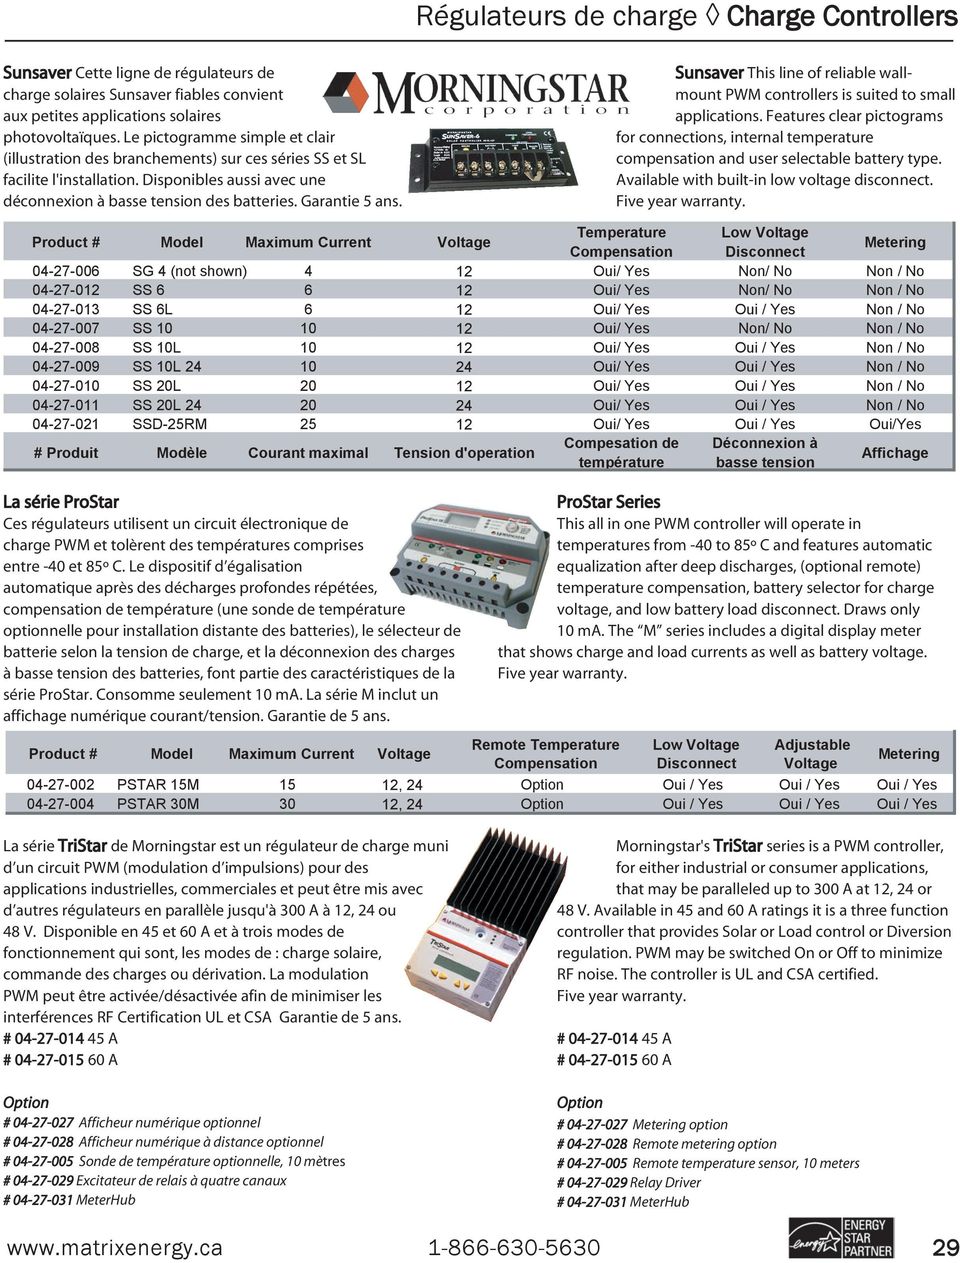 Sunsaver This line of reliable wallmount PWM controllers is suited to small applications. Features clear pictograms for connections, internal temperature compensation and user selectable battery type.